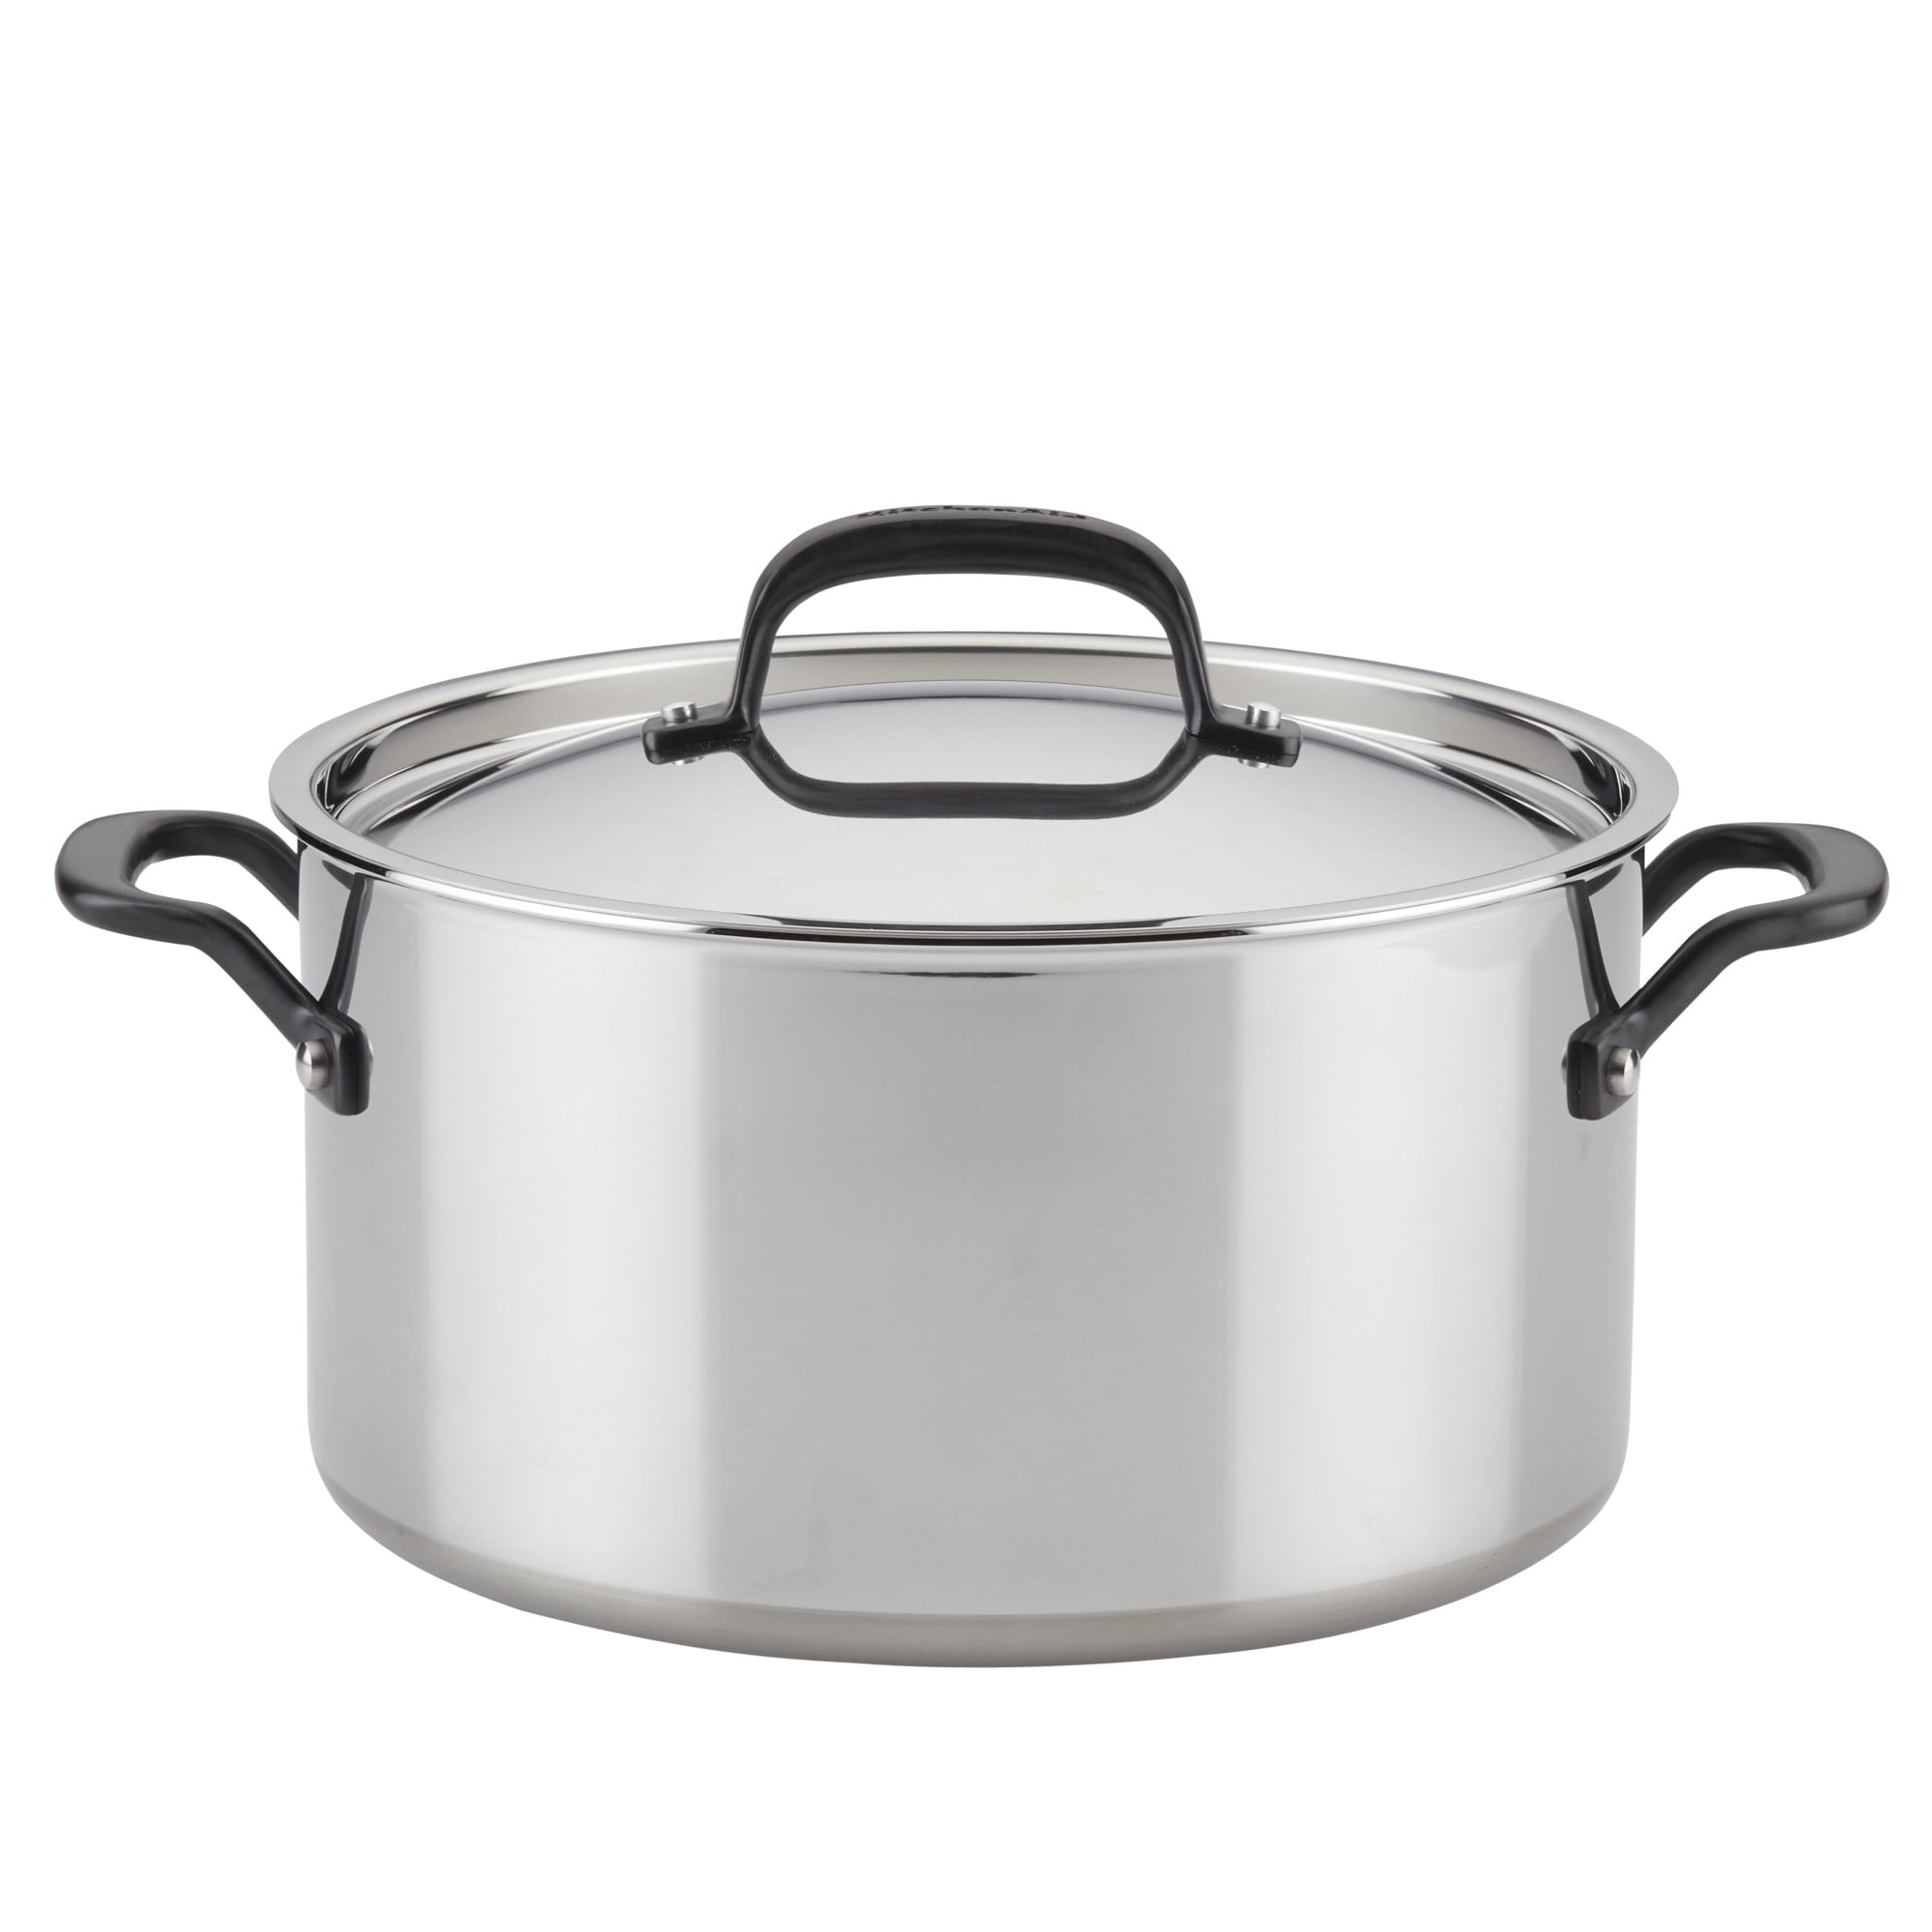 KitchenAid Stainless Steel 4 QtLow Casserole Stockpot with Glass Lid NEW IN BOX 